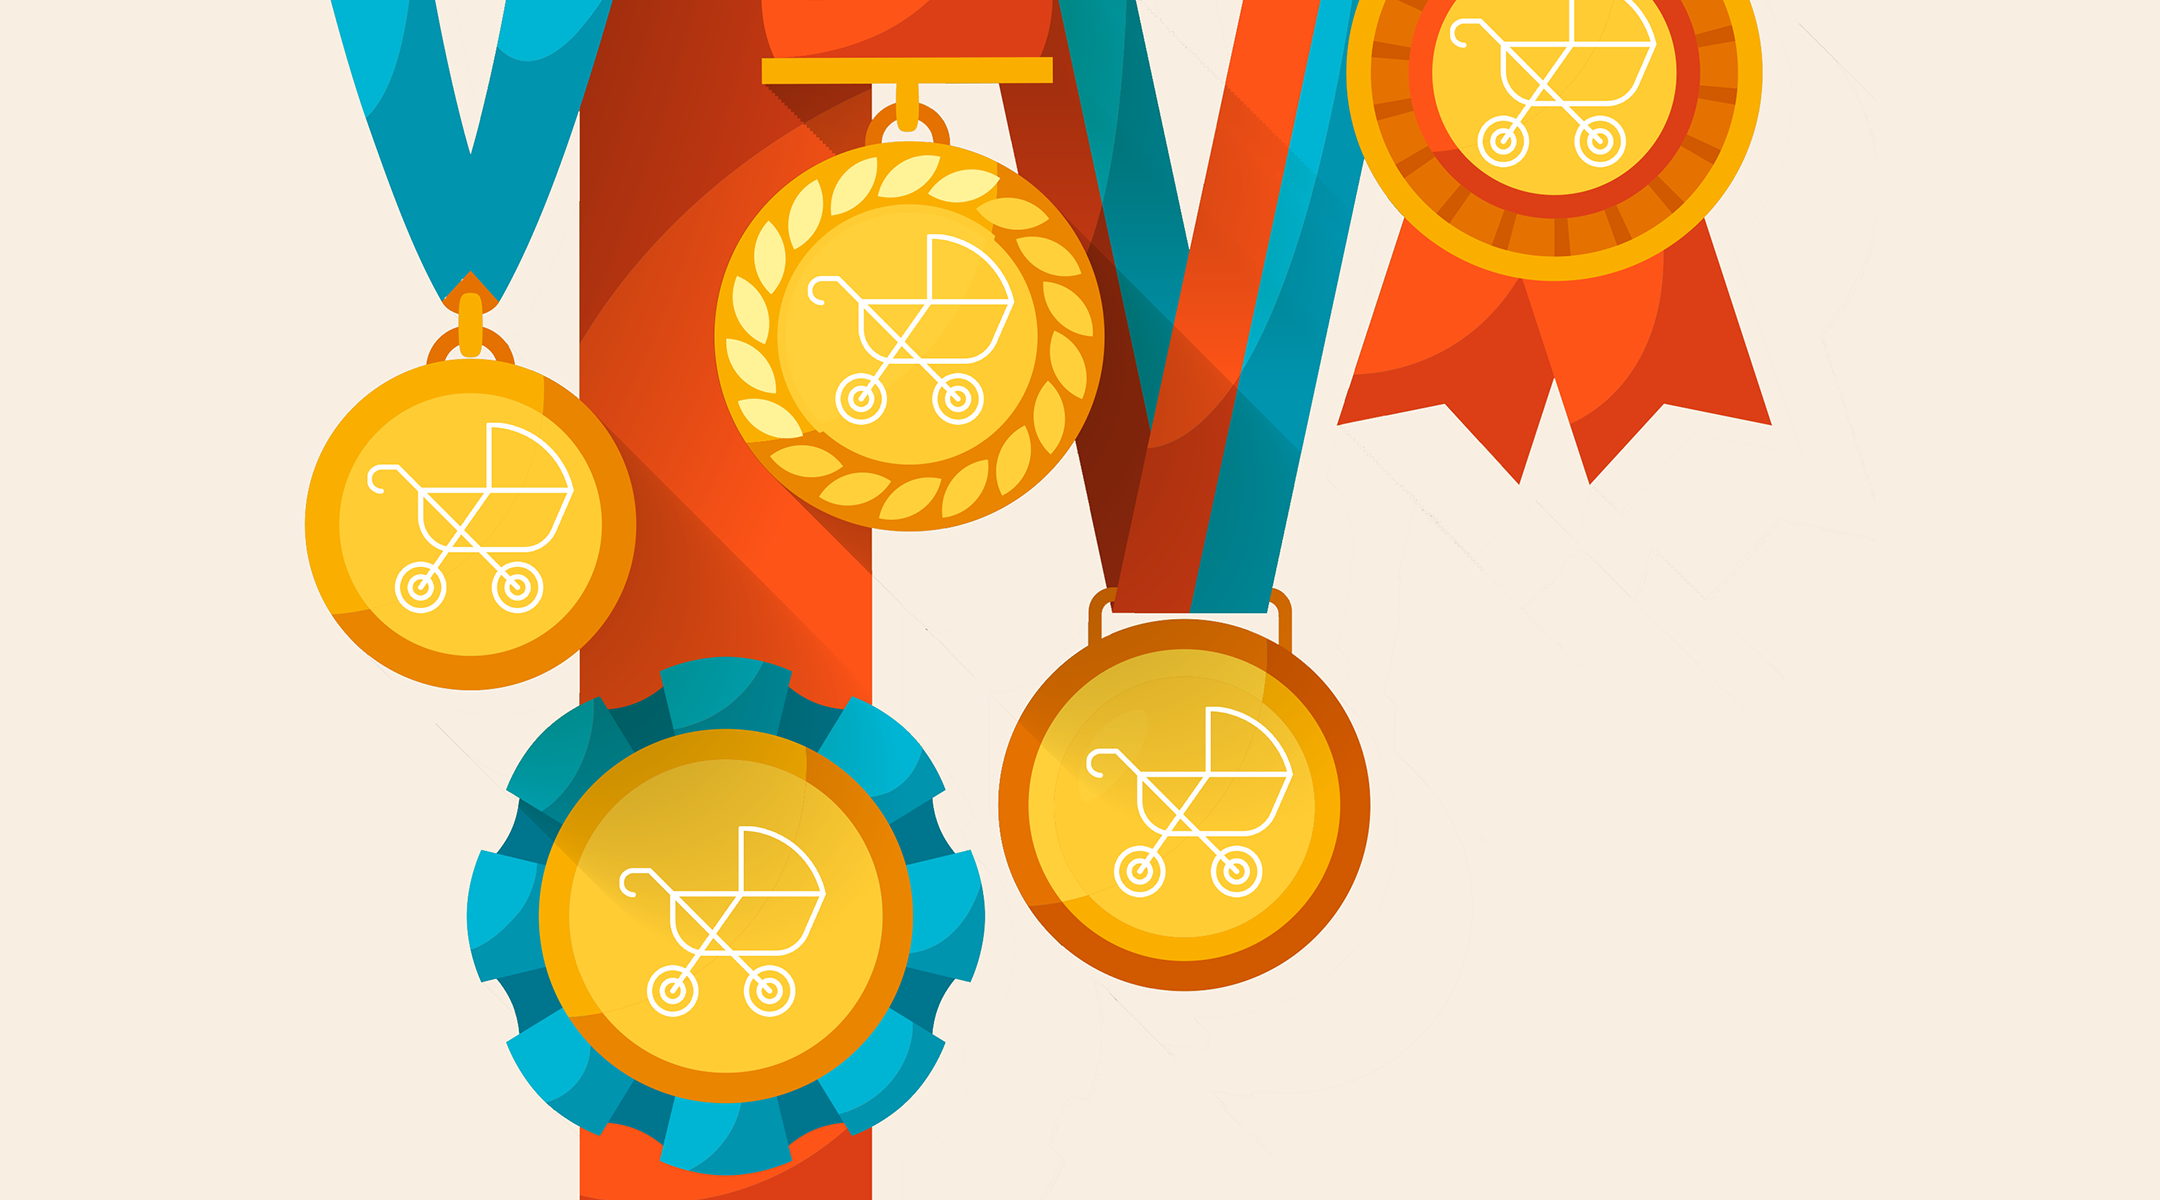 5 illustrated medals with stroller icon on each